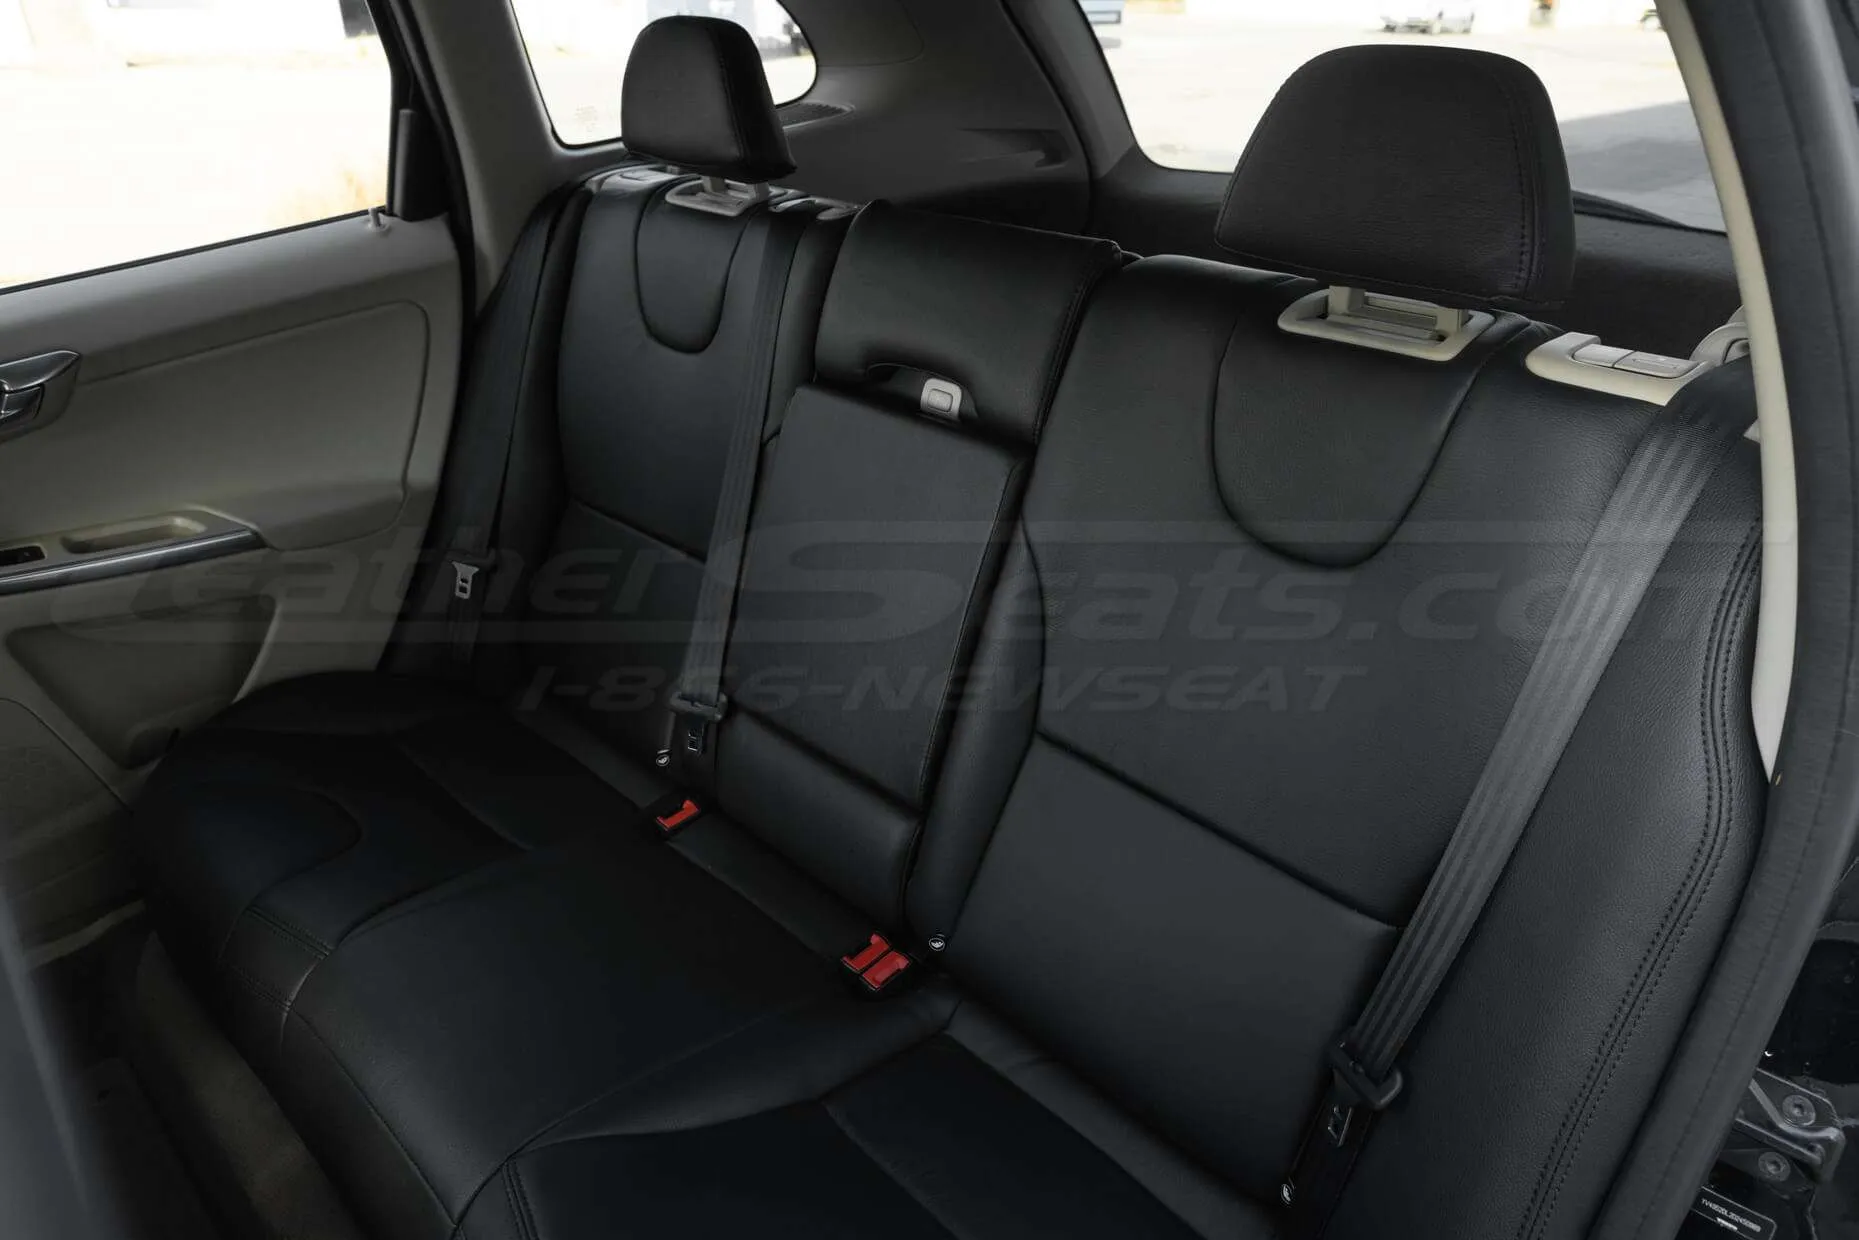 Rear leather seats from drivers side